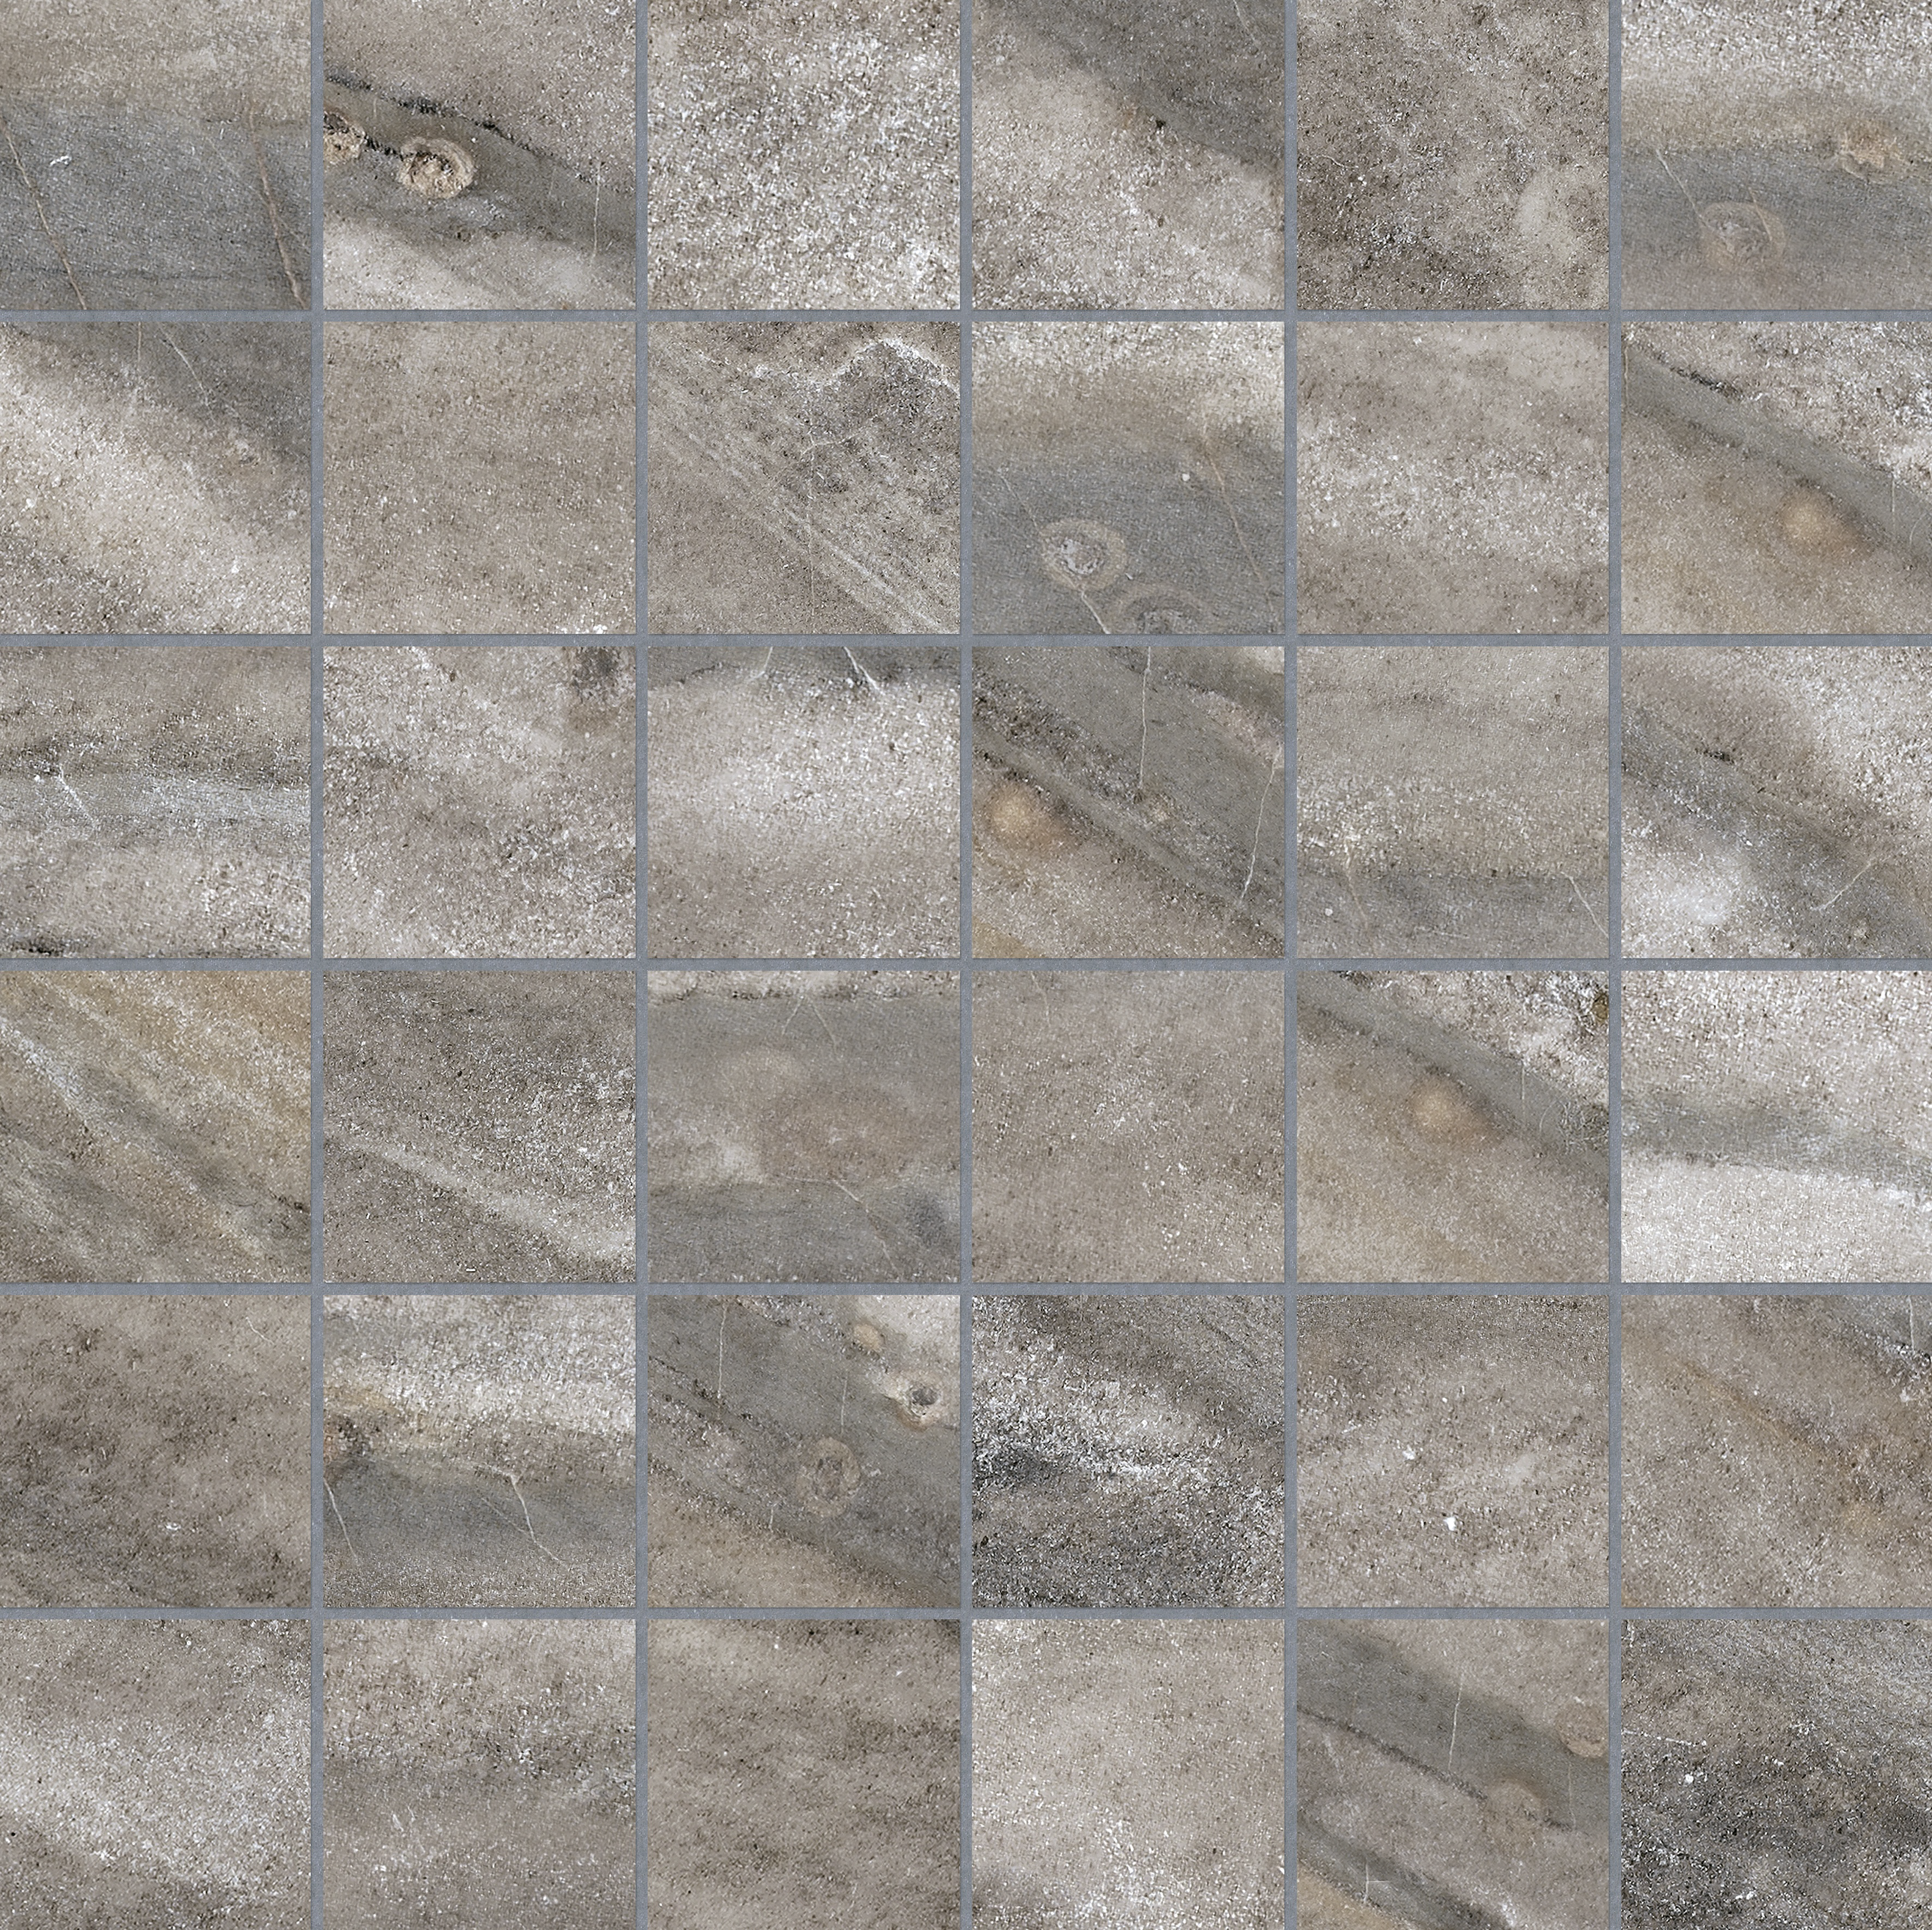 mica straight stack 2x2-inch pattern glazed porcelain mosaic from evolution anatolia collection distributed by surface group international matte finish straight edge edge mesh shape